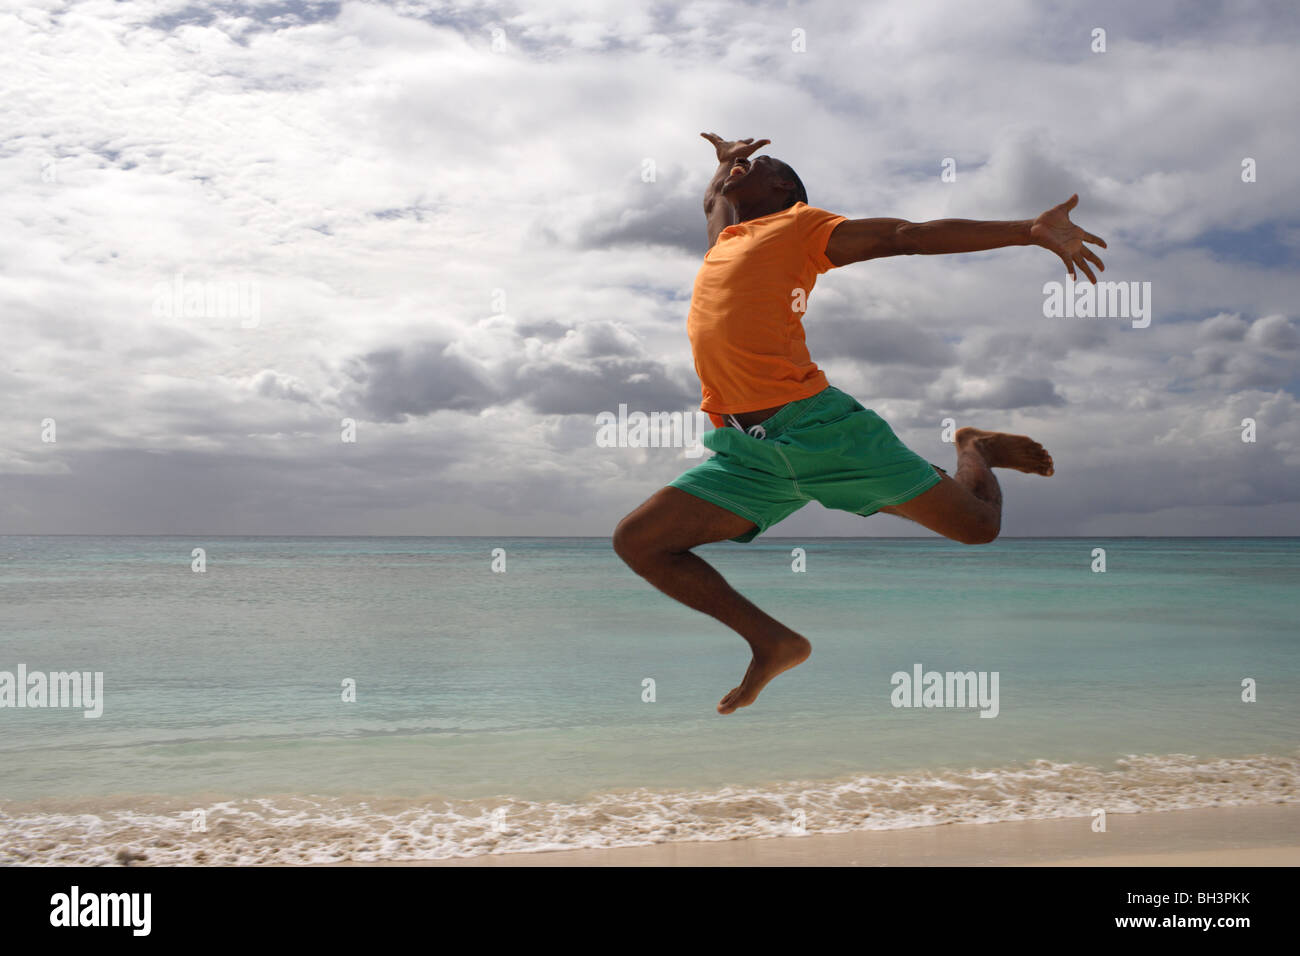 Young man leaping on a tropical beach, smiling Stock Photo